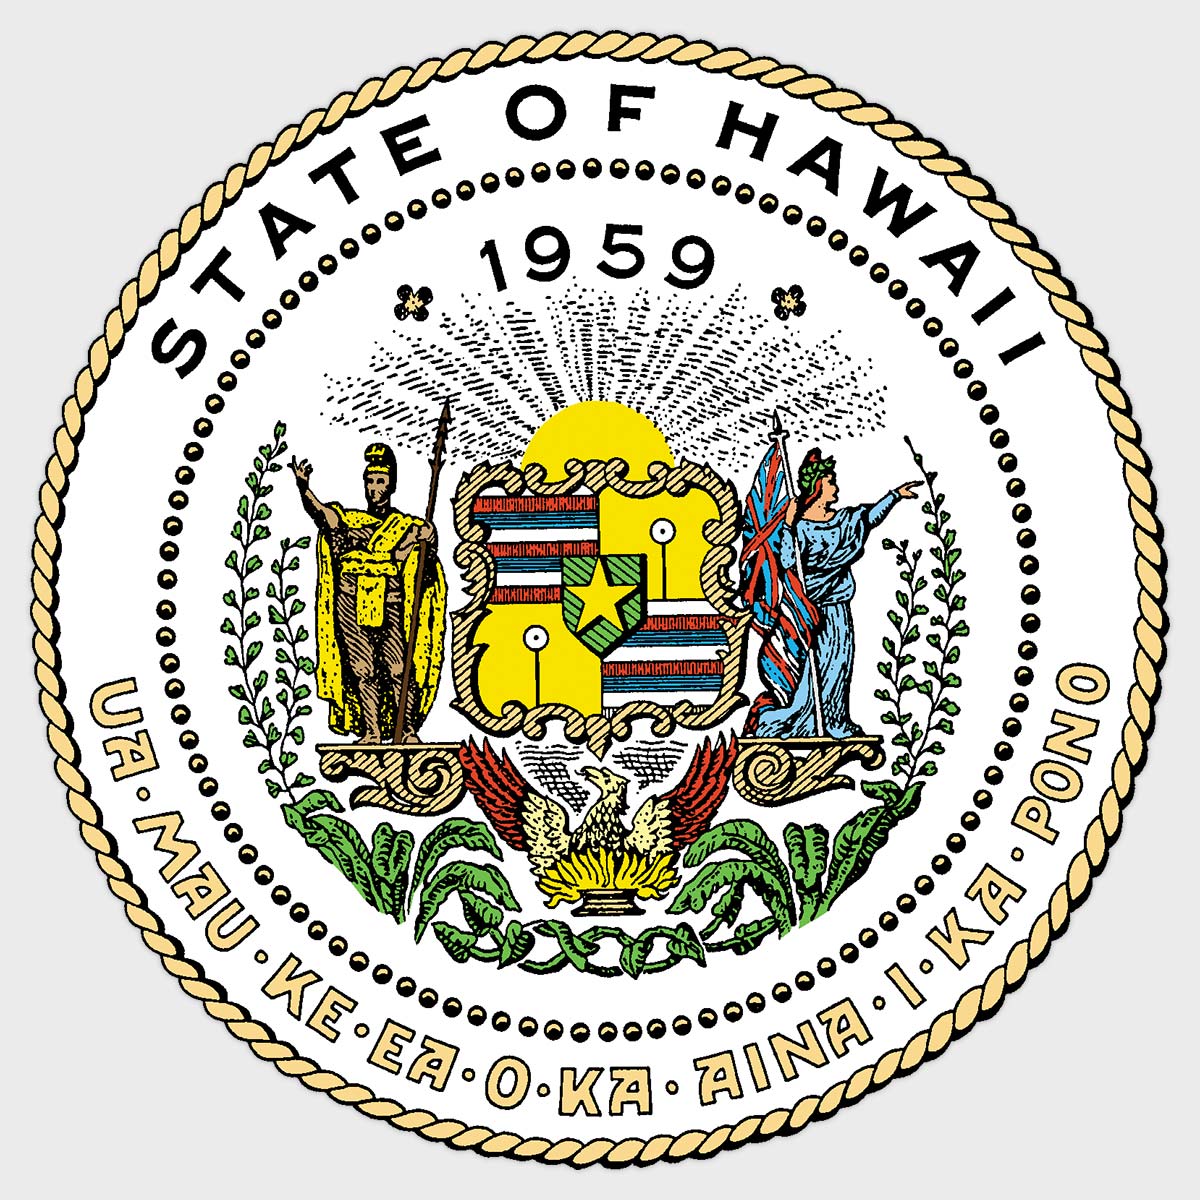 12/12/14 – Unique History Of Modern Banking In Hawaii Traced ...